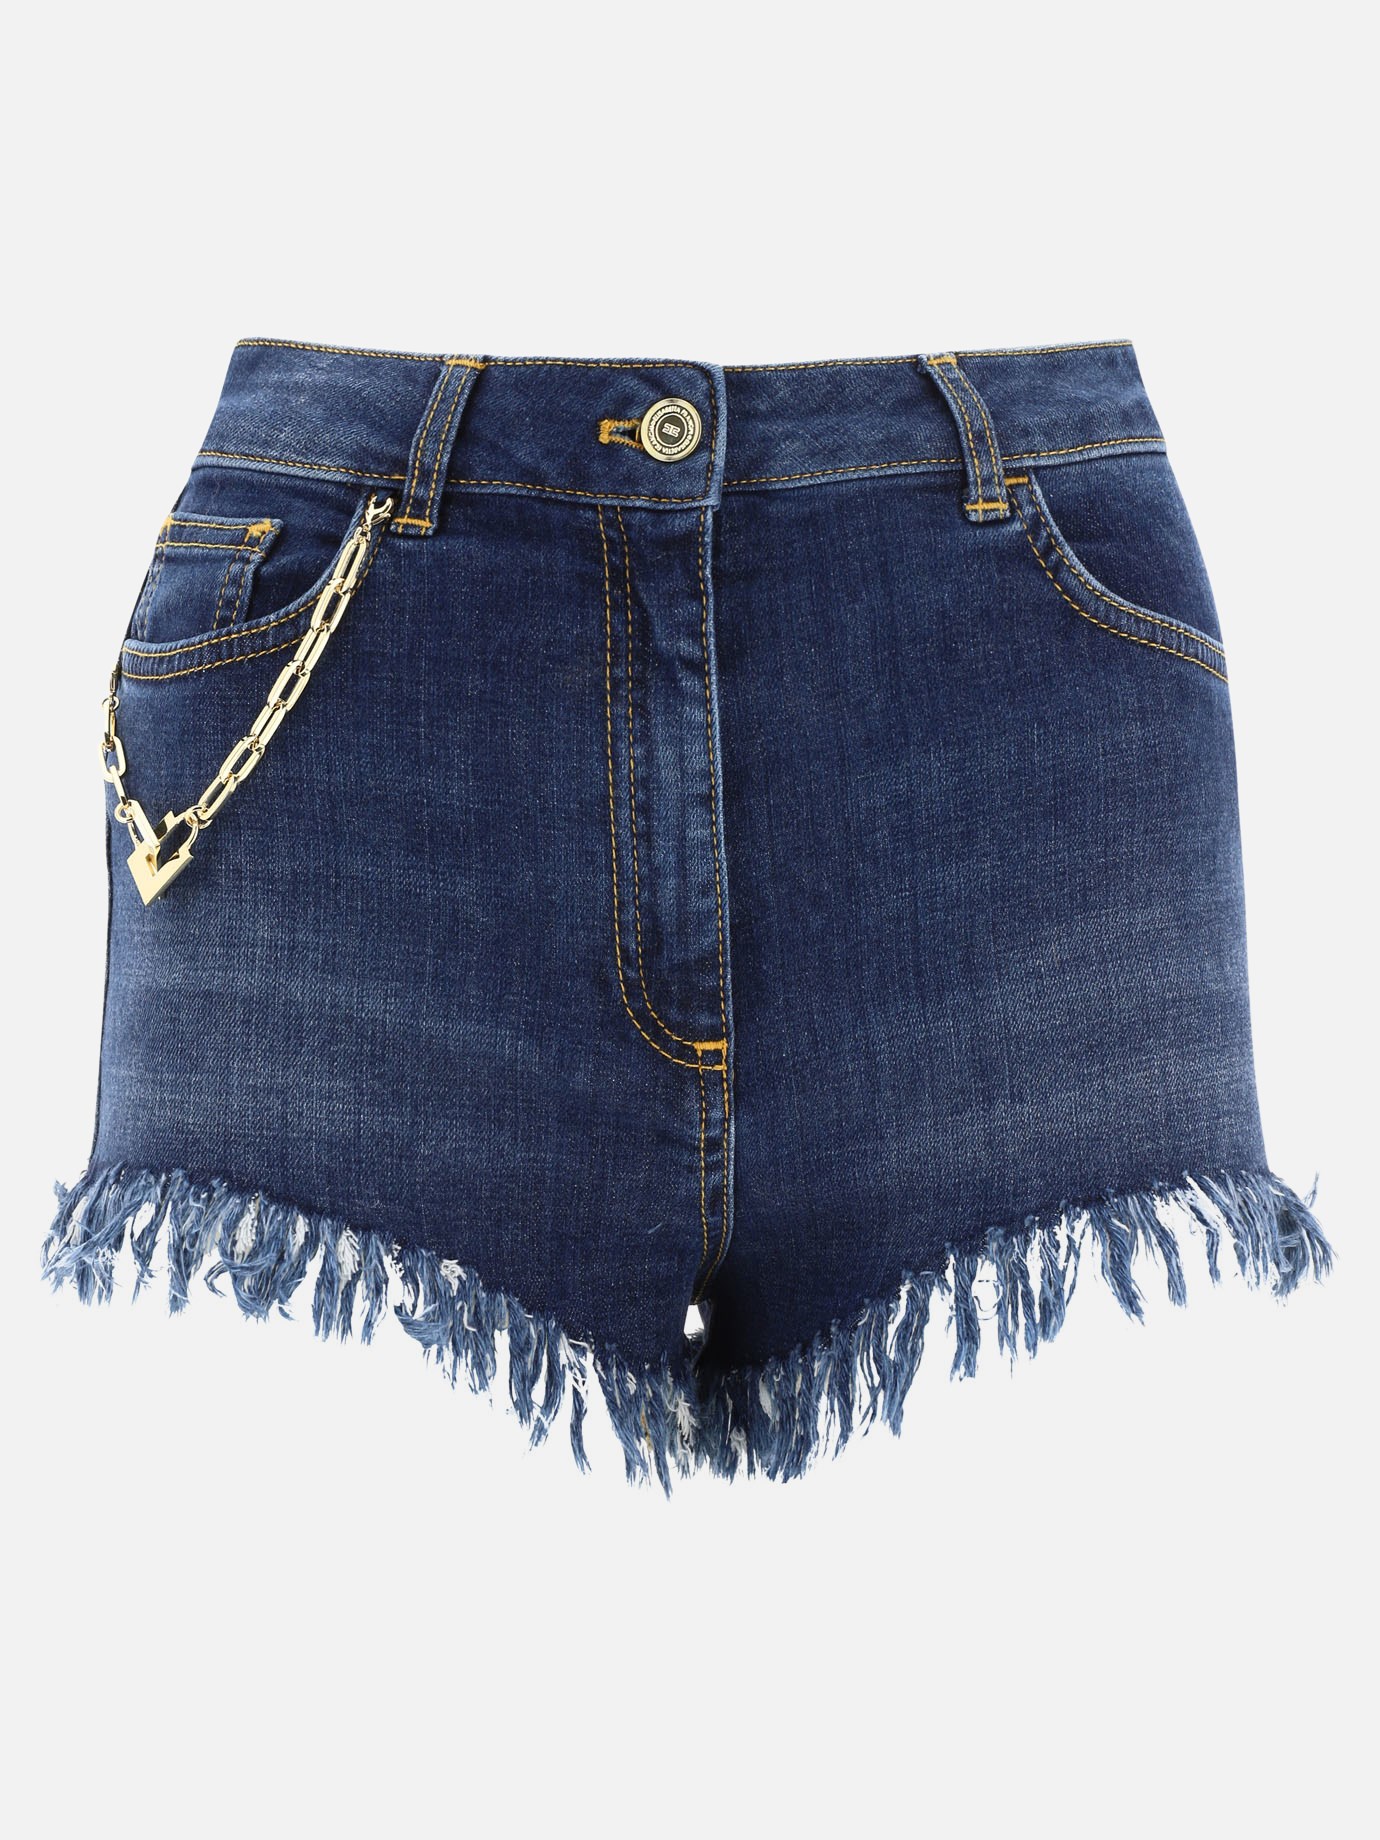 Shorts with chain detail